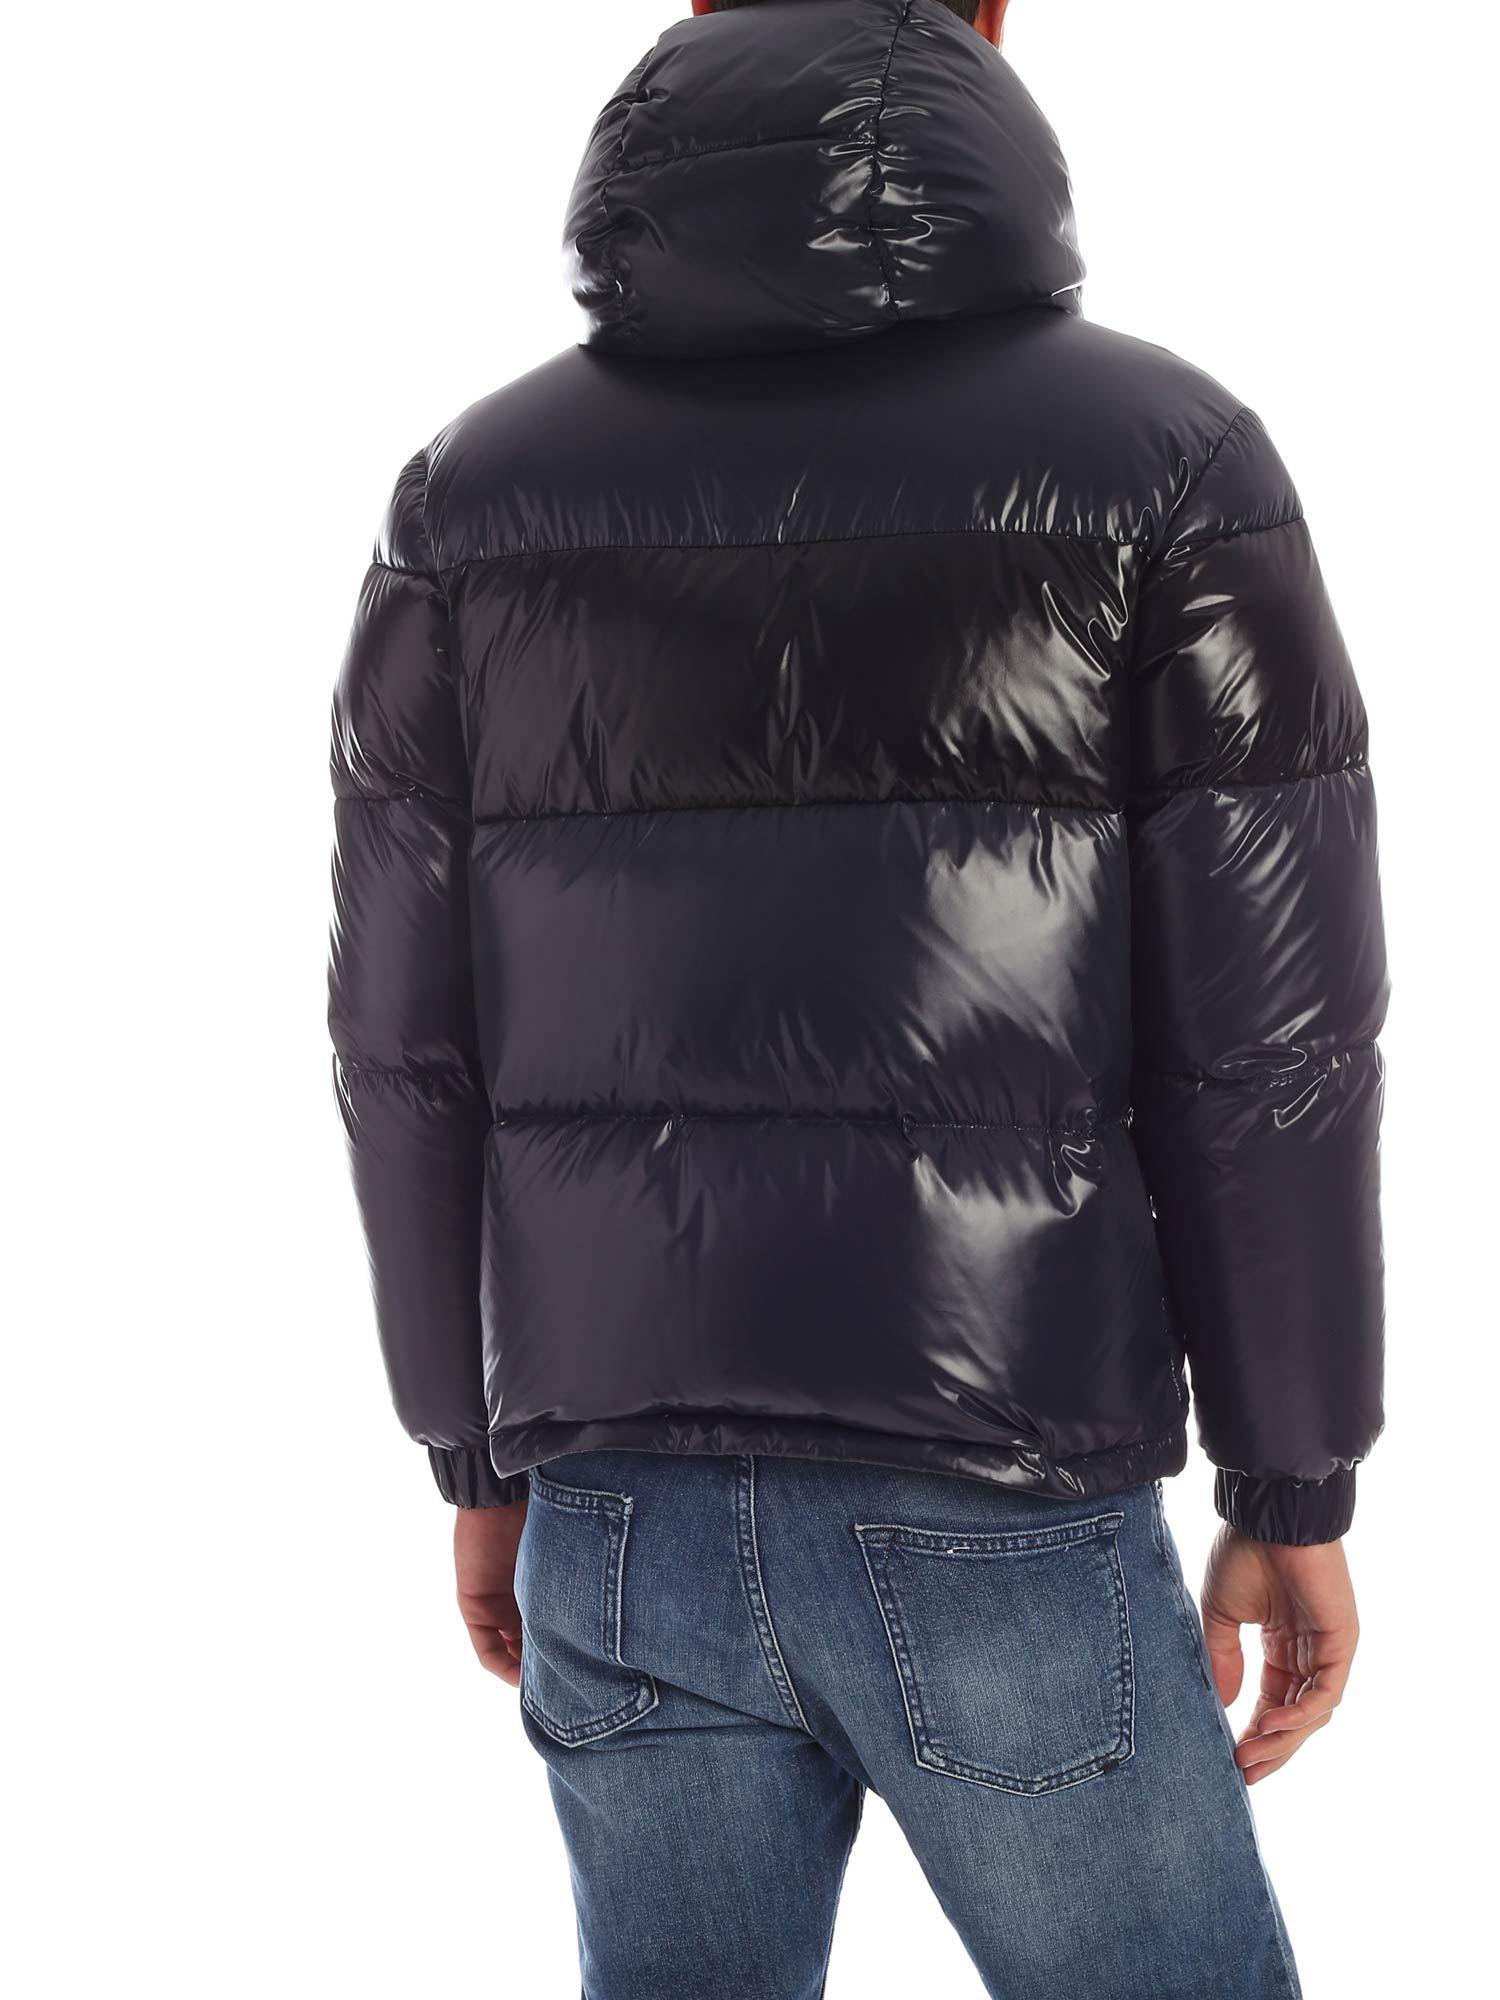 Moncler Synthetic Gary Down Jacket In Dark Blue Color for Men - Lyst